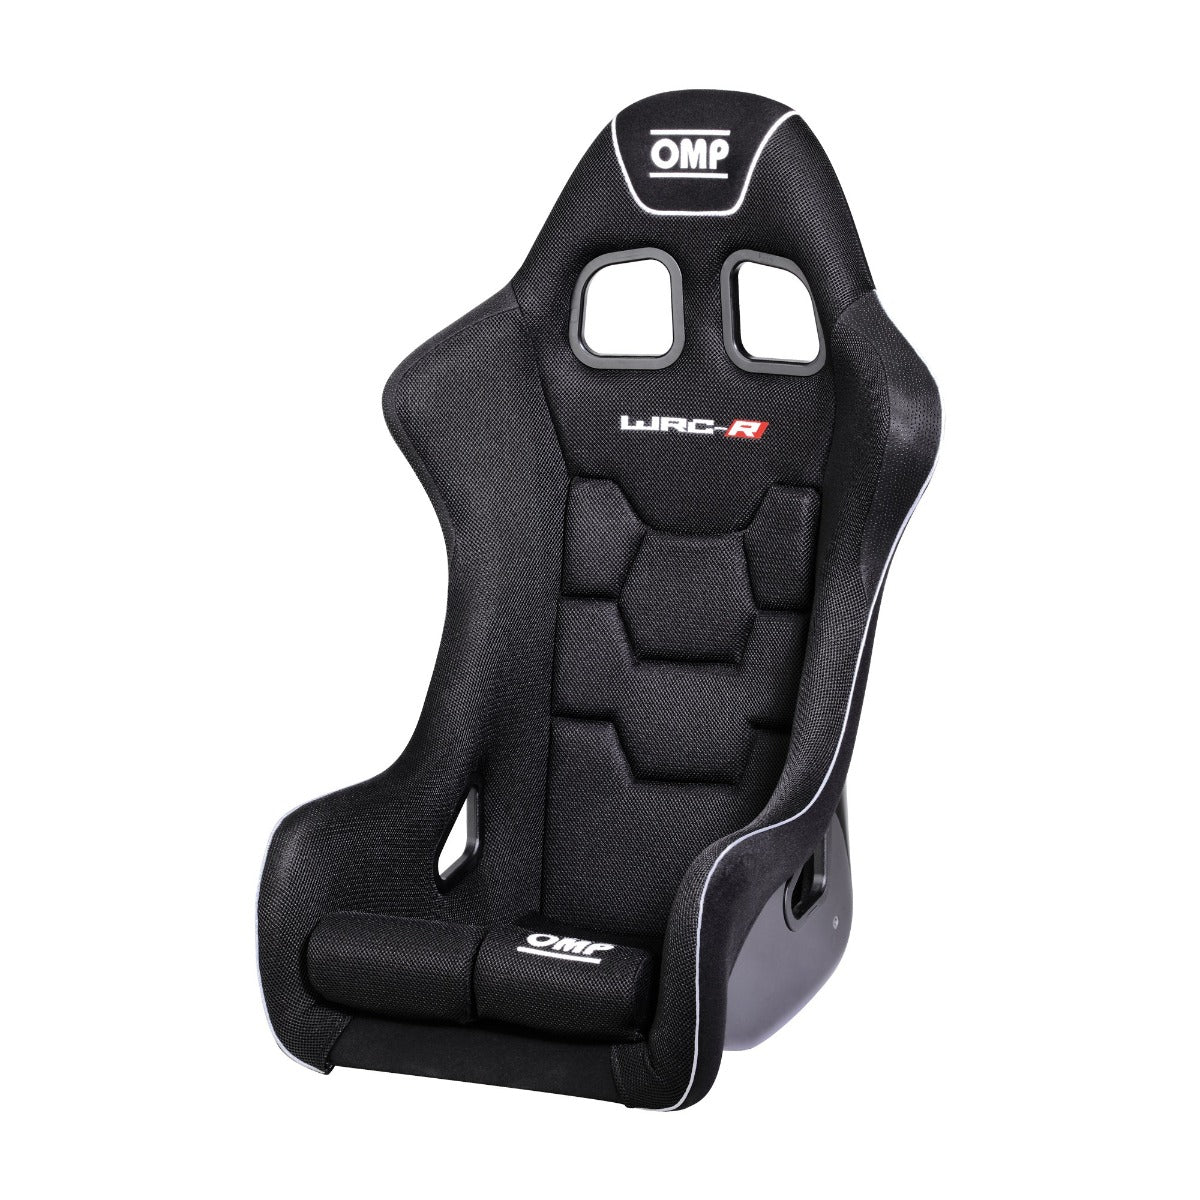 OMP WRC-R Racing Seat Best Deal with the lowest price when on sale with a discount Front